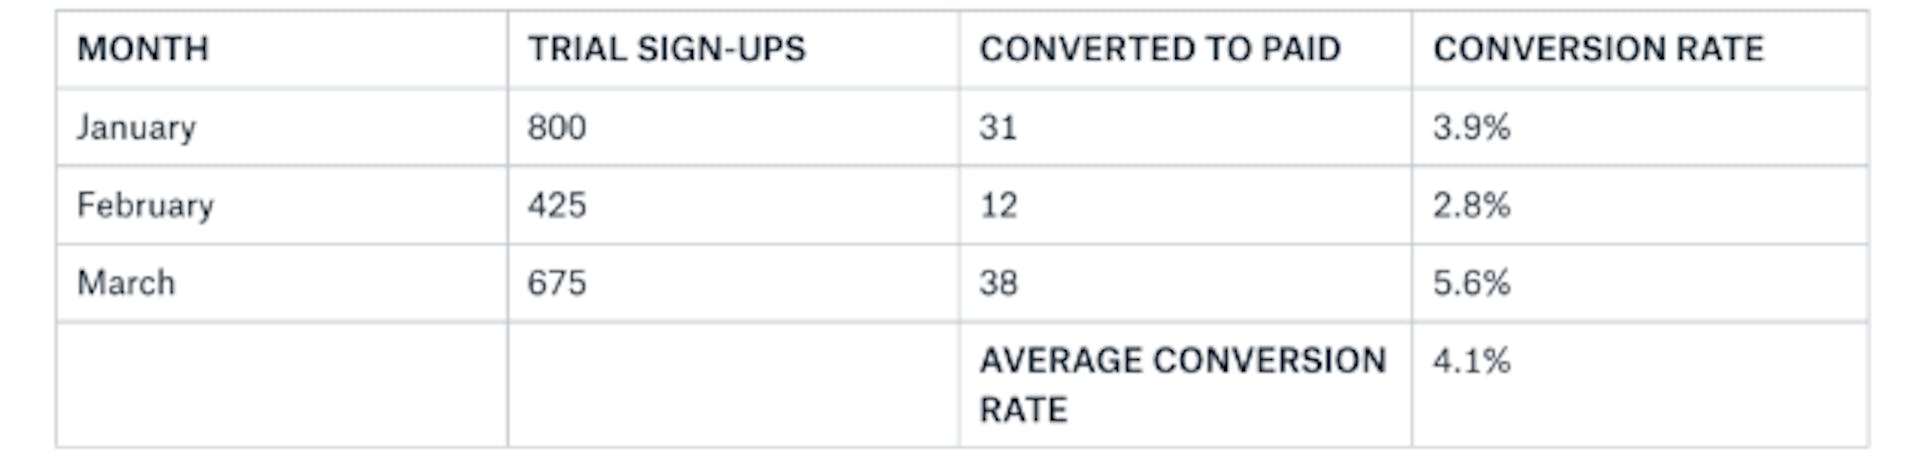 On average, you have a 4.1% conversion rate.